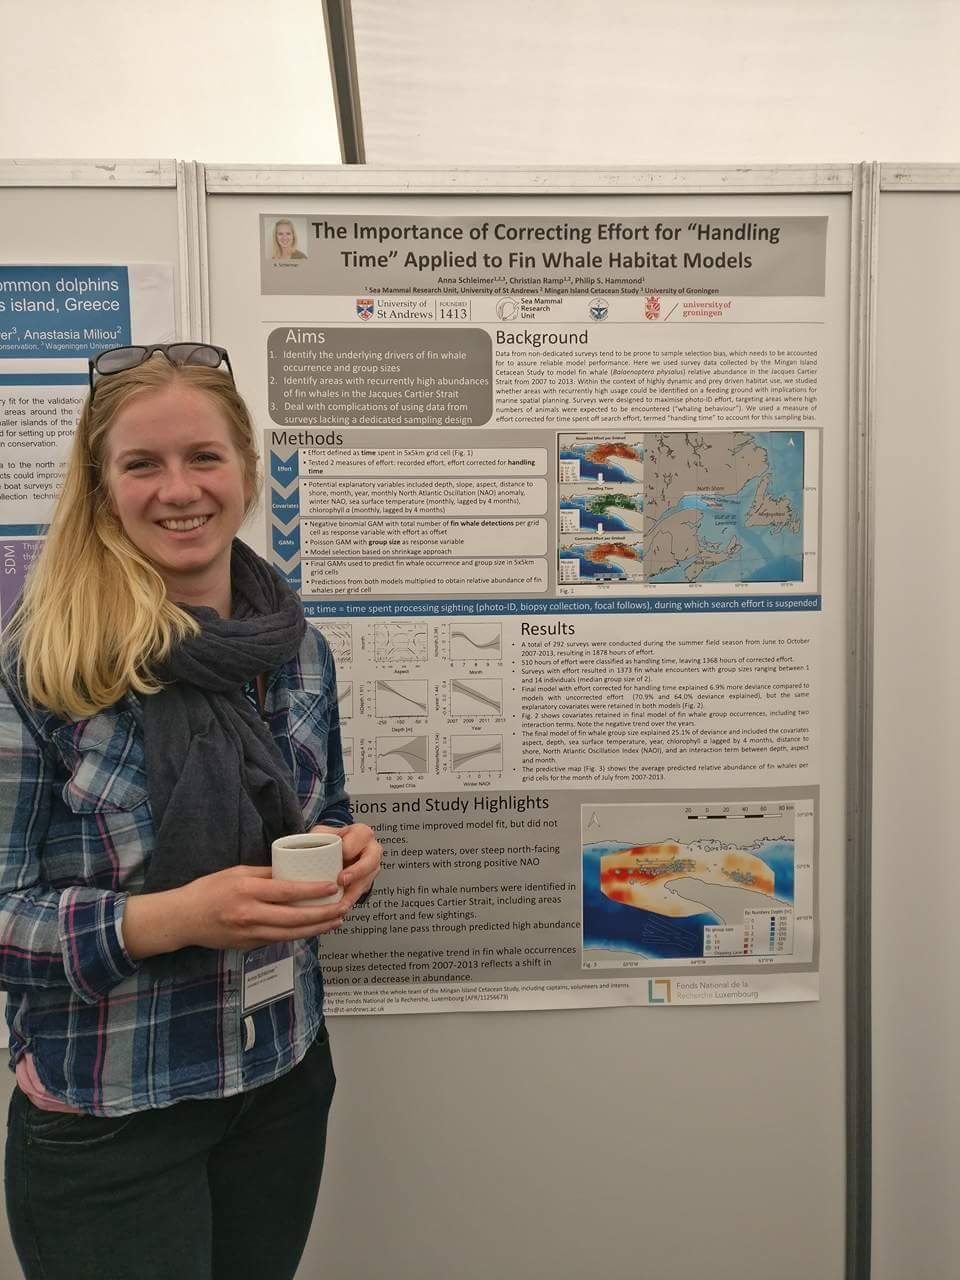 Anna's poster on fin whale habitat modelling